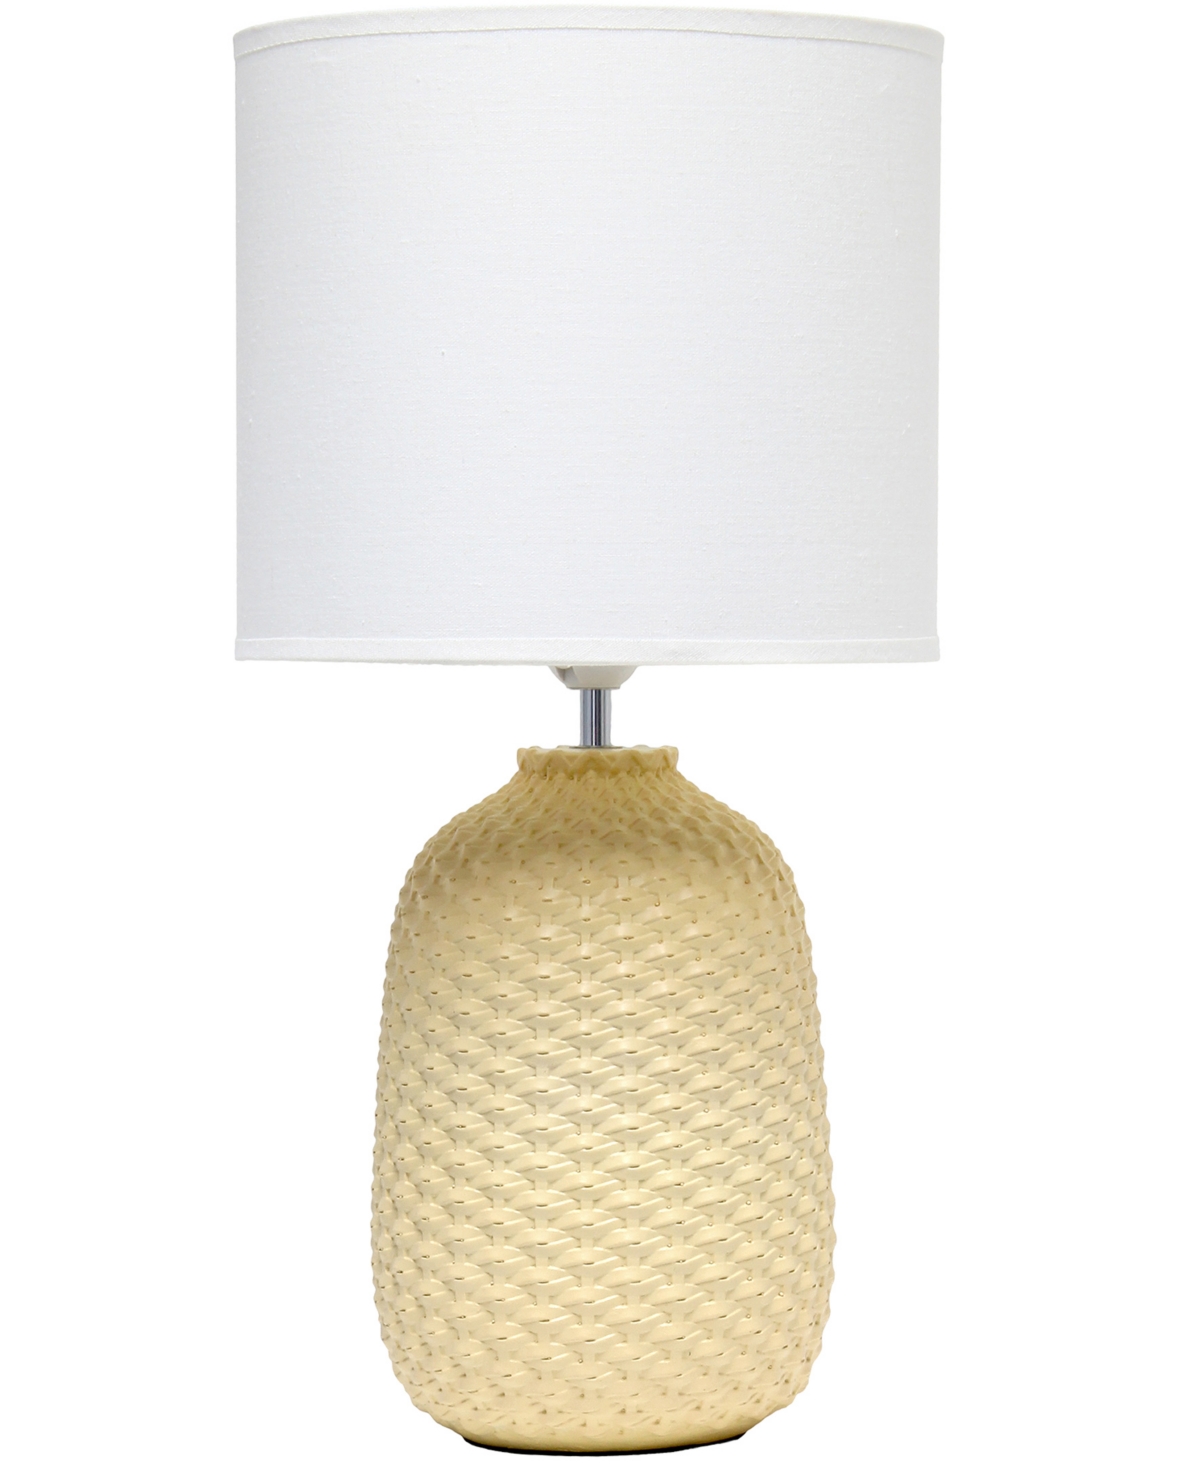 Shop Simple Designs 20.4" Tall Traditional Ceramic Purled Texture Bedside Table Desk Lamp With White Fabric Drum Shade In Yellow